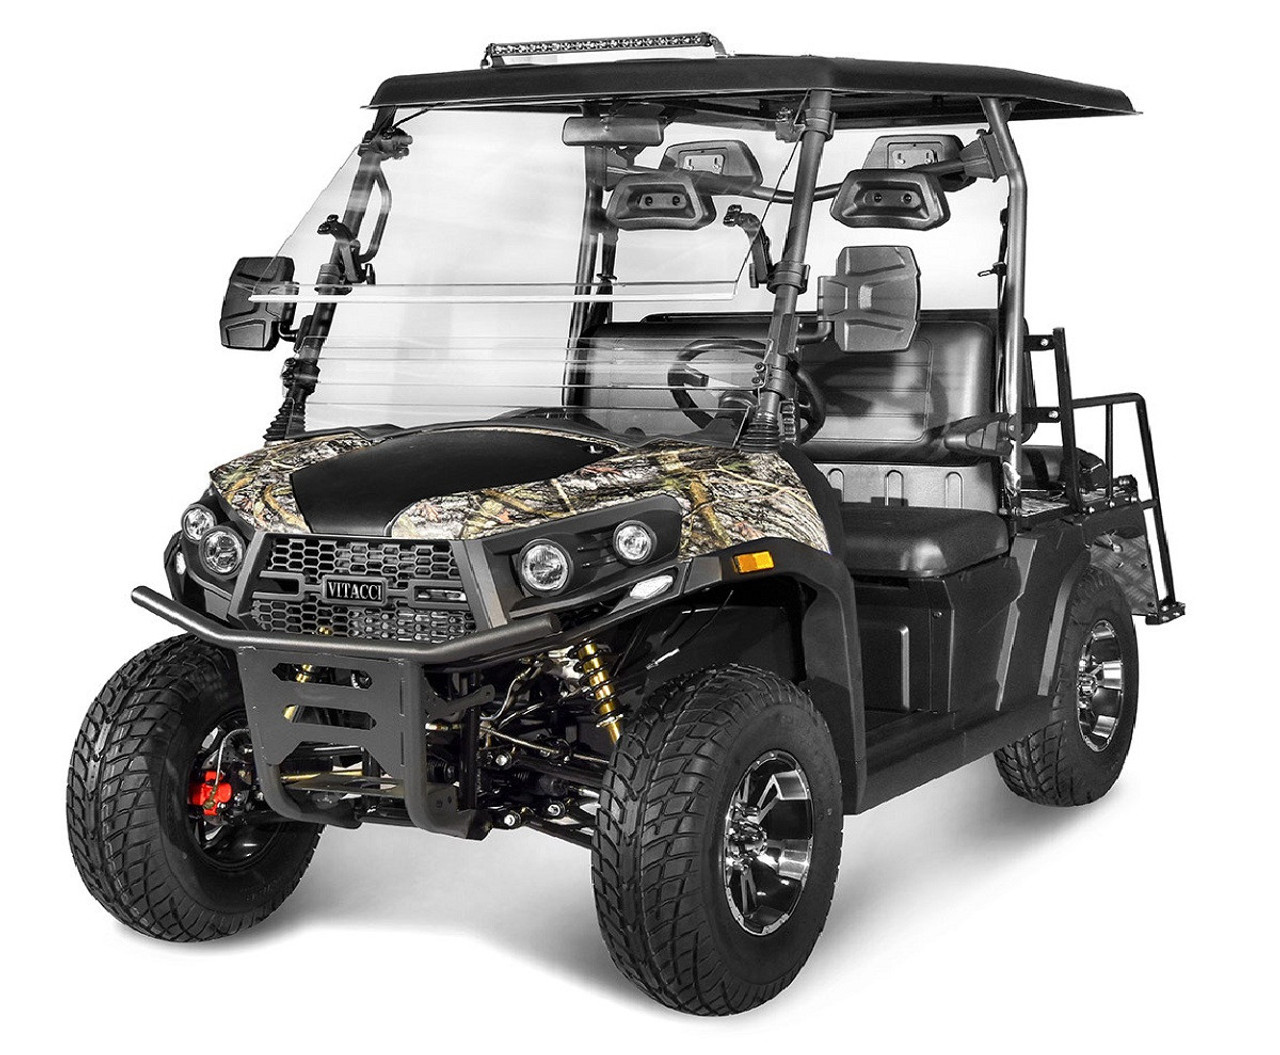 New Vitacci Electric GOLF CART with LITHIUM BATTERY Digital Dash display Free windshield and with Extended Roof  - CAMO